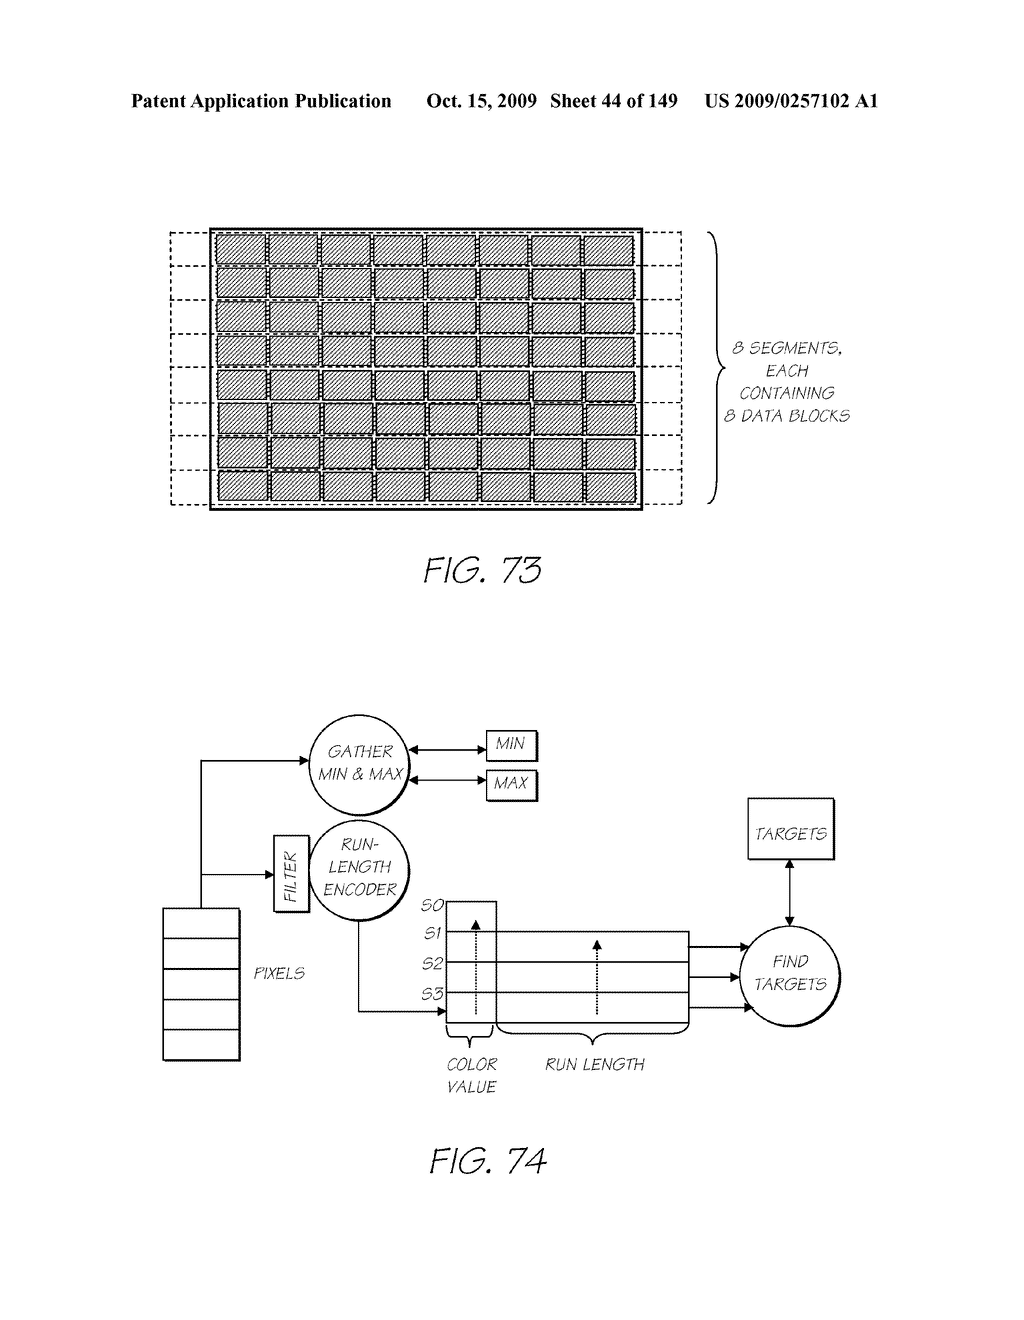 IMAGE PROCESSING APPARATUS HAVING CARD READER FOR APPLYING EFFECTS STORED ON A CARD TO A STORED IMAGE - diagram, schematic, and image 45